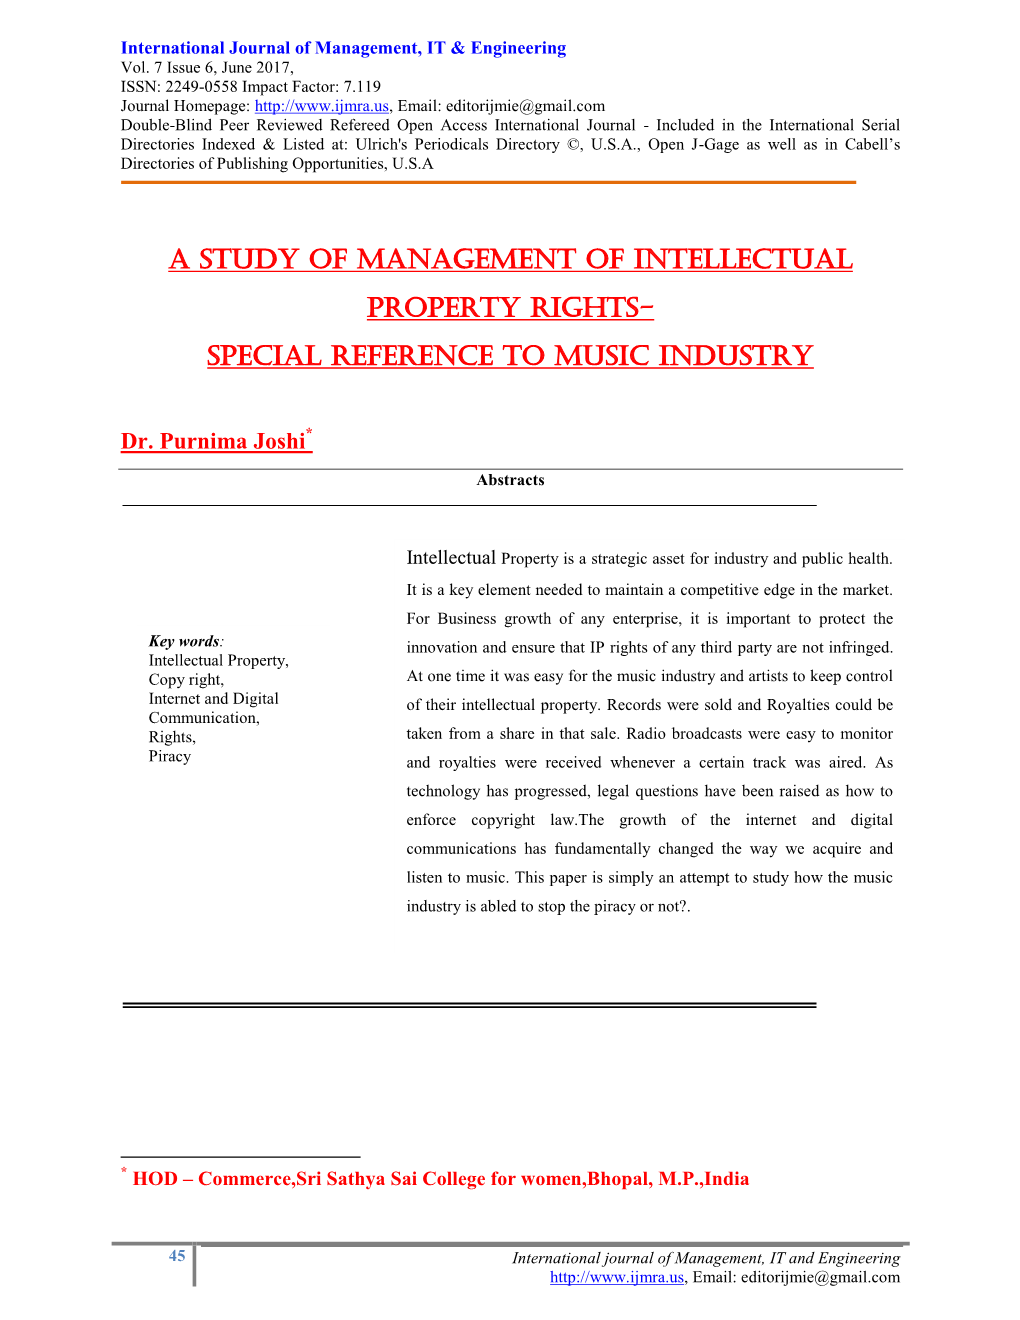 A Study of Management of Intellectual Property Rights- Special Reference to Music Industry